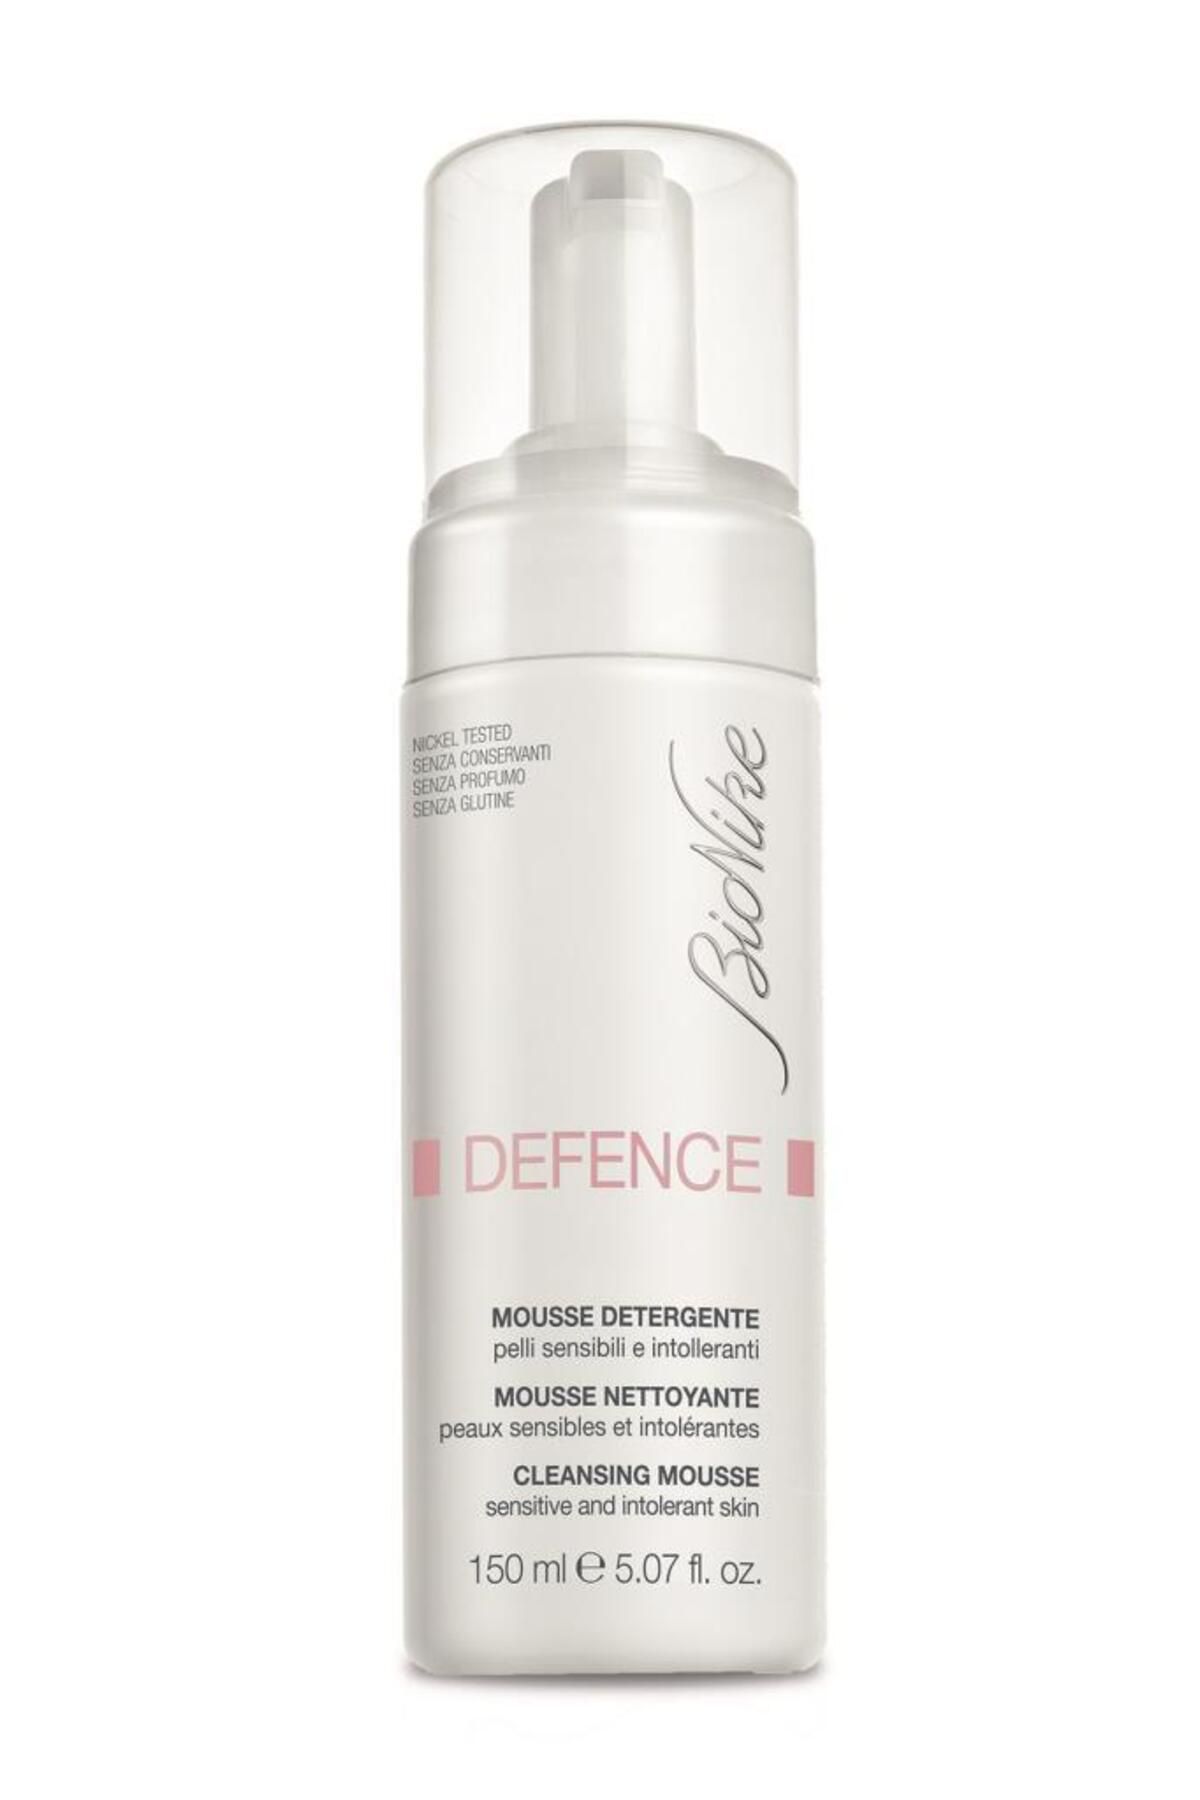 BioNike Defence Cleansing Mousse 150 ml